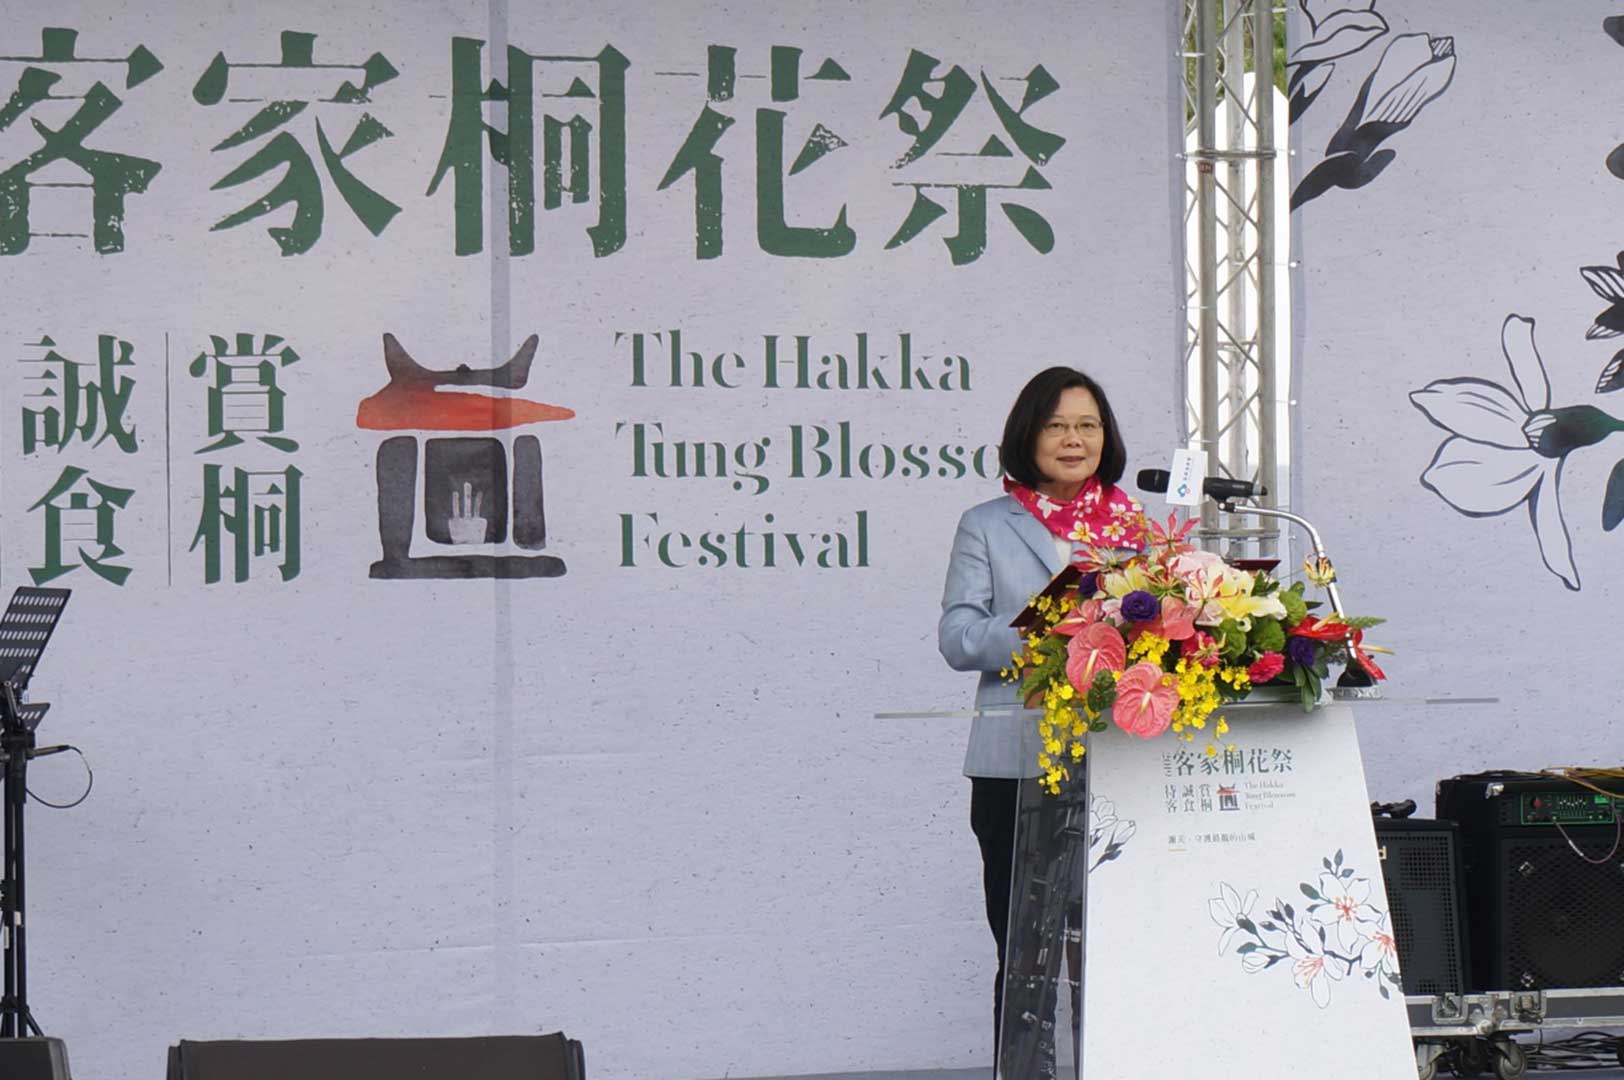 President Tsai noted that since the first edition organized by HAC in 2002, the yearly celebration of Tung flowers is comparable to Japan’s cherry blossom festivals and has now become a major Taiwanese tourist attraction. 